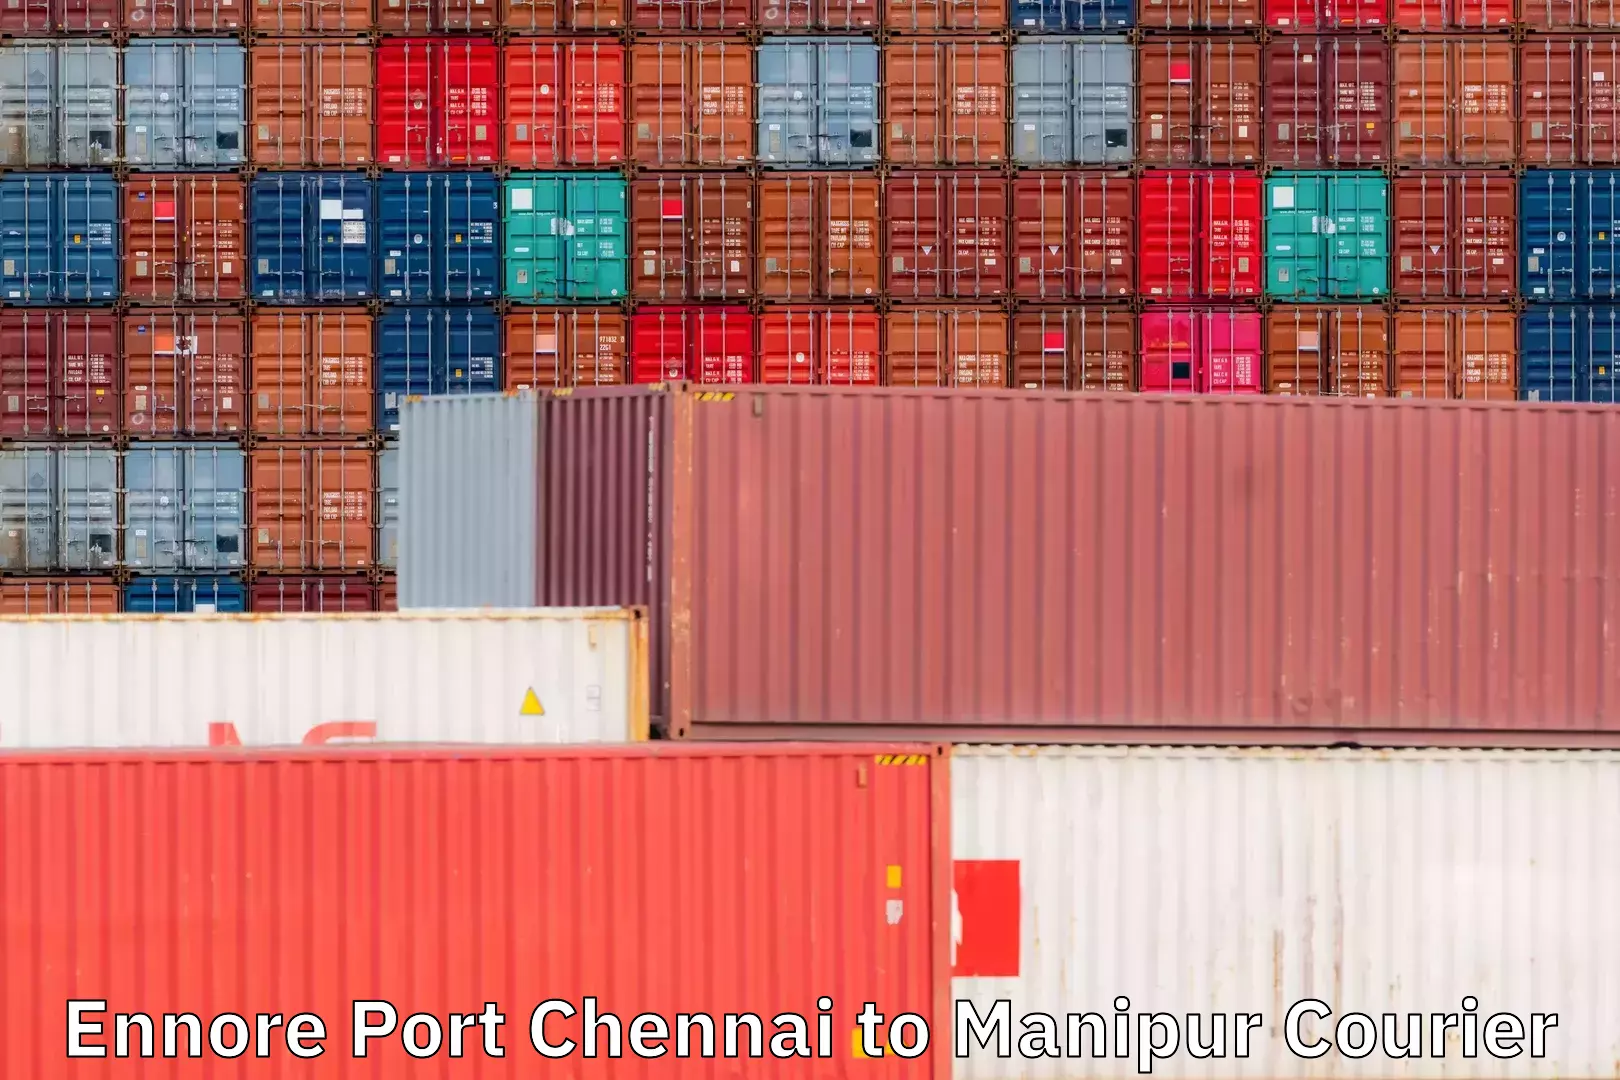 Cargo delivery service Ennore Port Chennai to Kanti